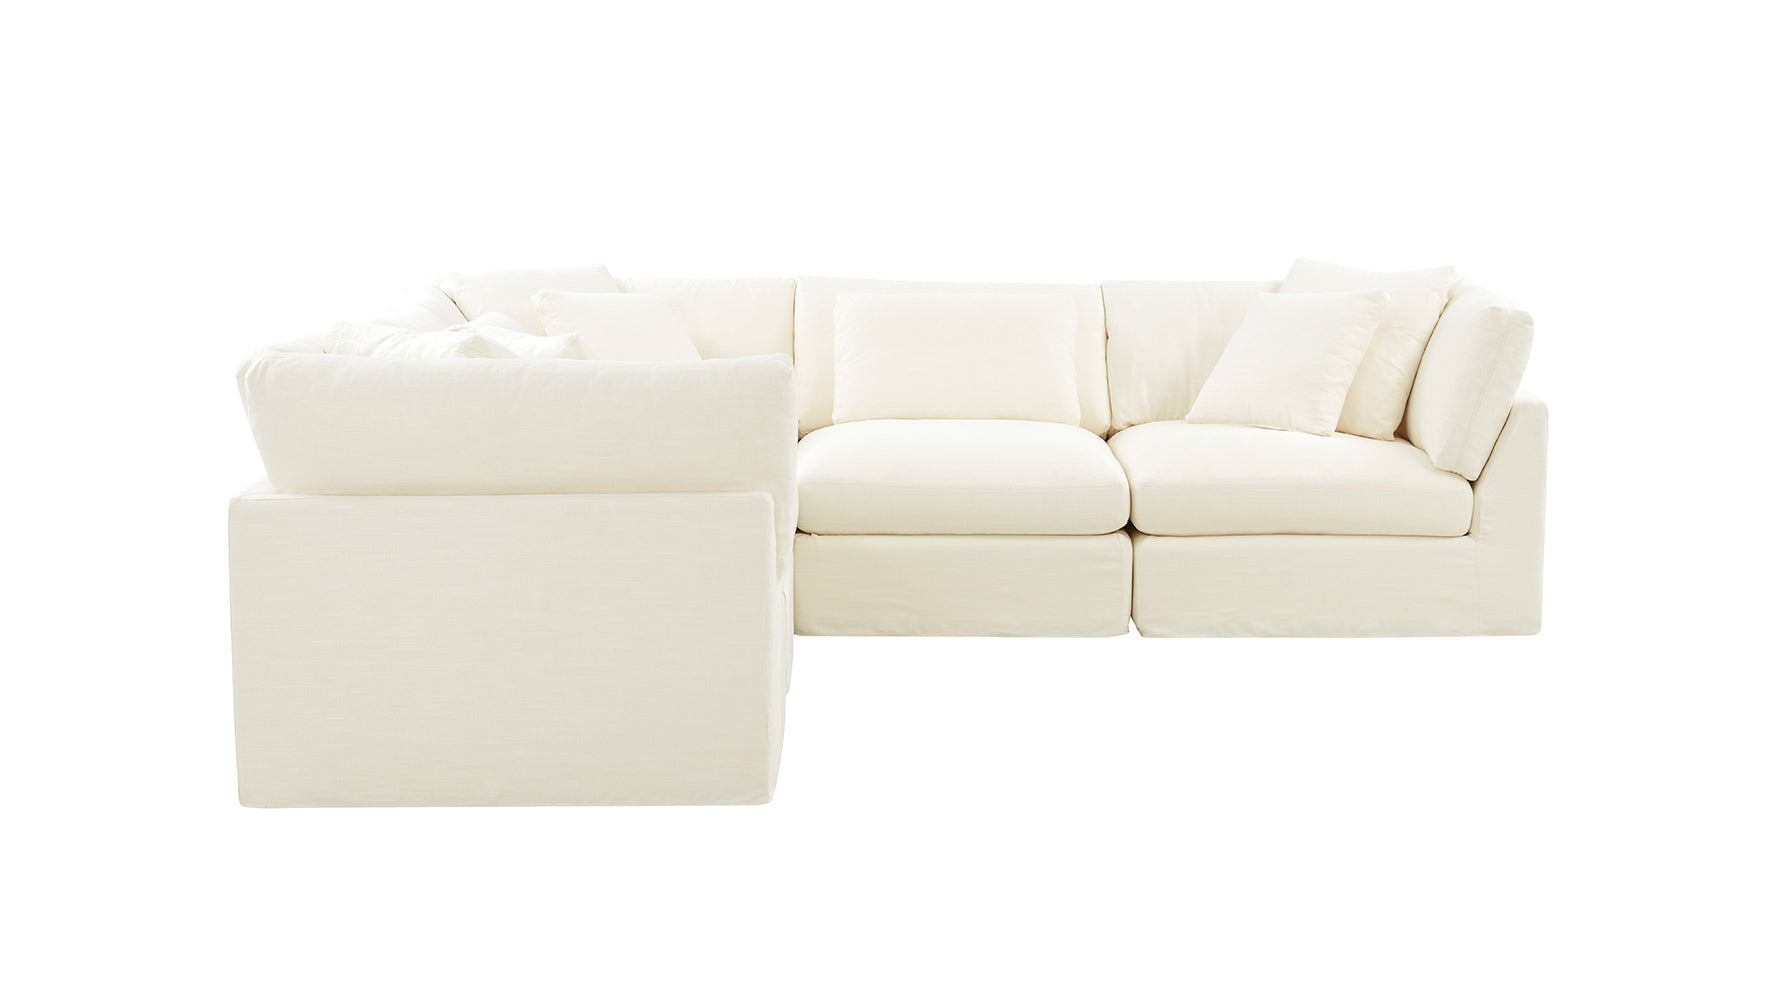 Get Together™ 5-Piece Modular Sectional Closed, Large, Cream Linen - Image 7